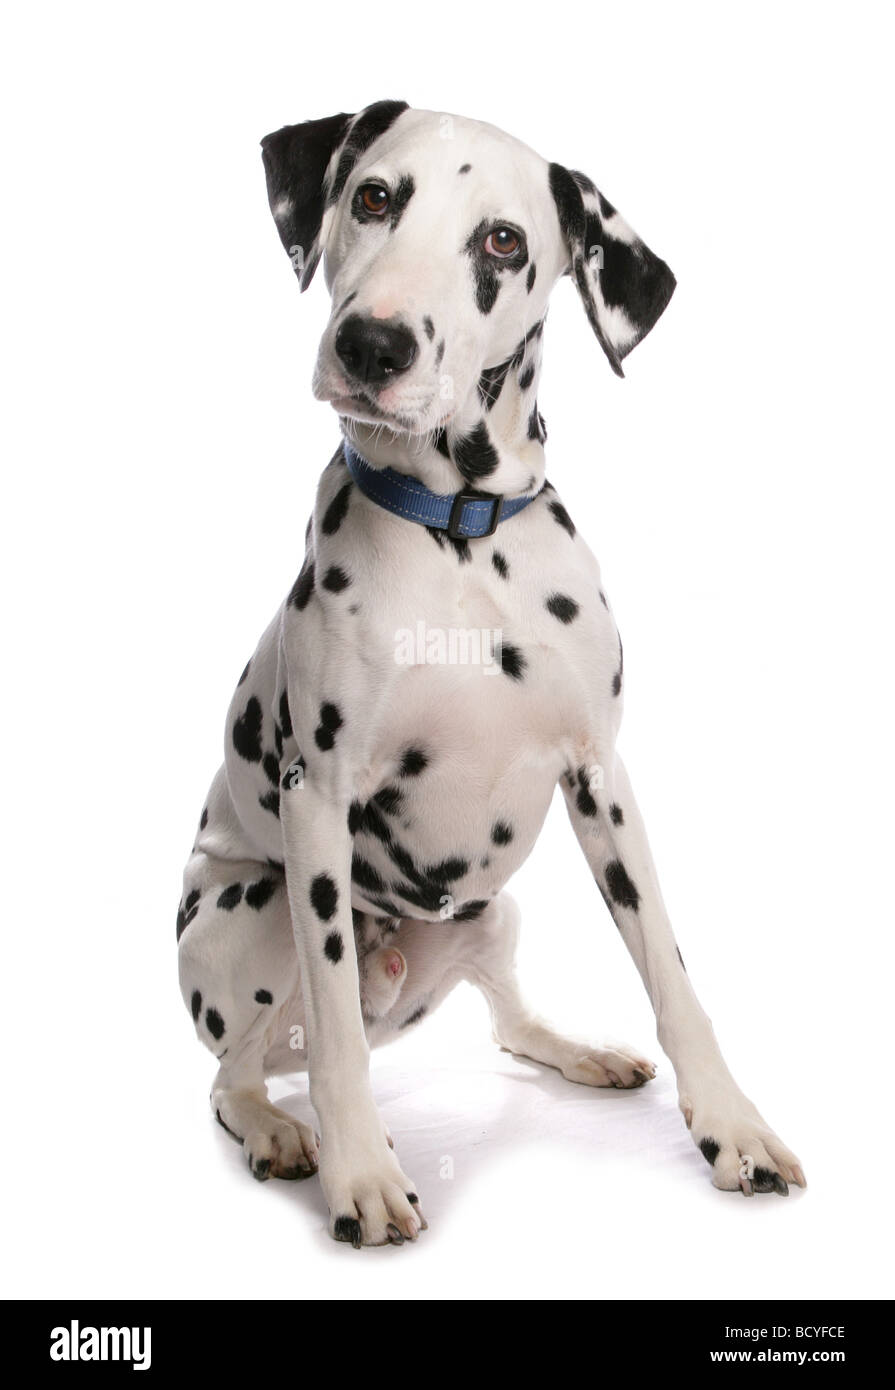 Dalmatian. Adult dog sitting. Studio picture against a white background Stock Photo